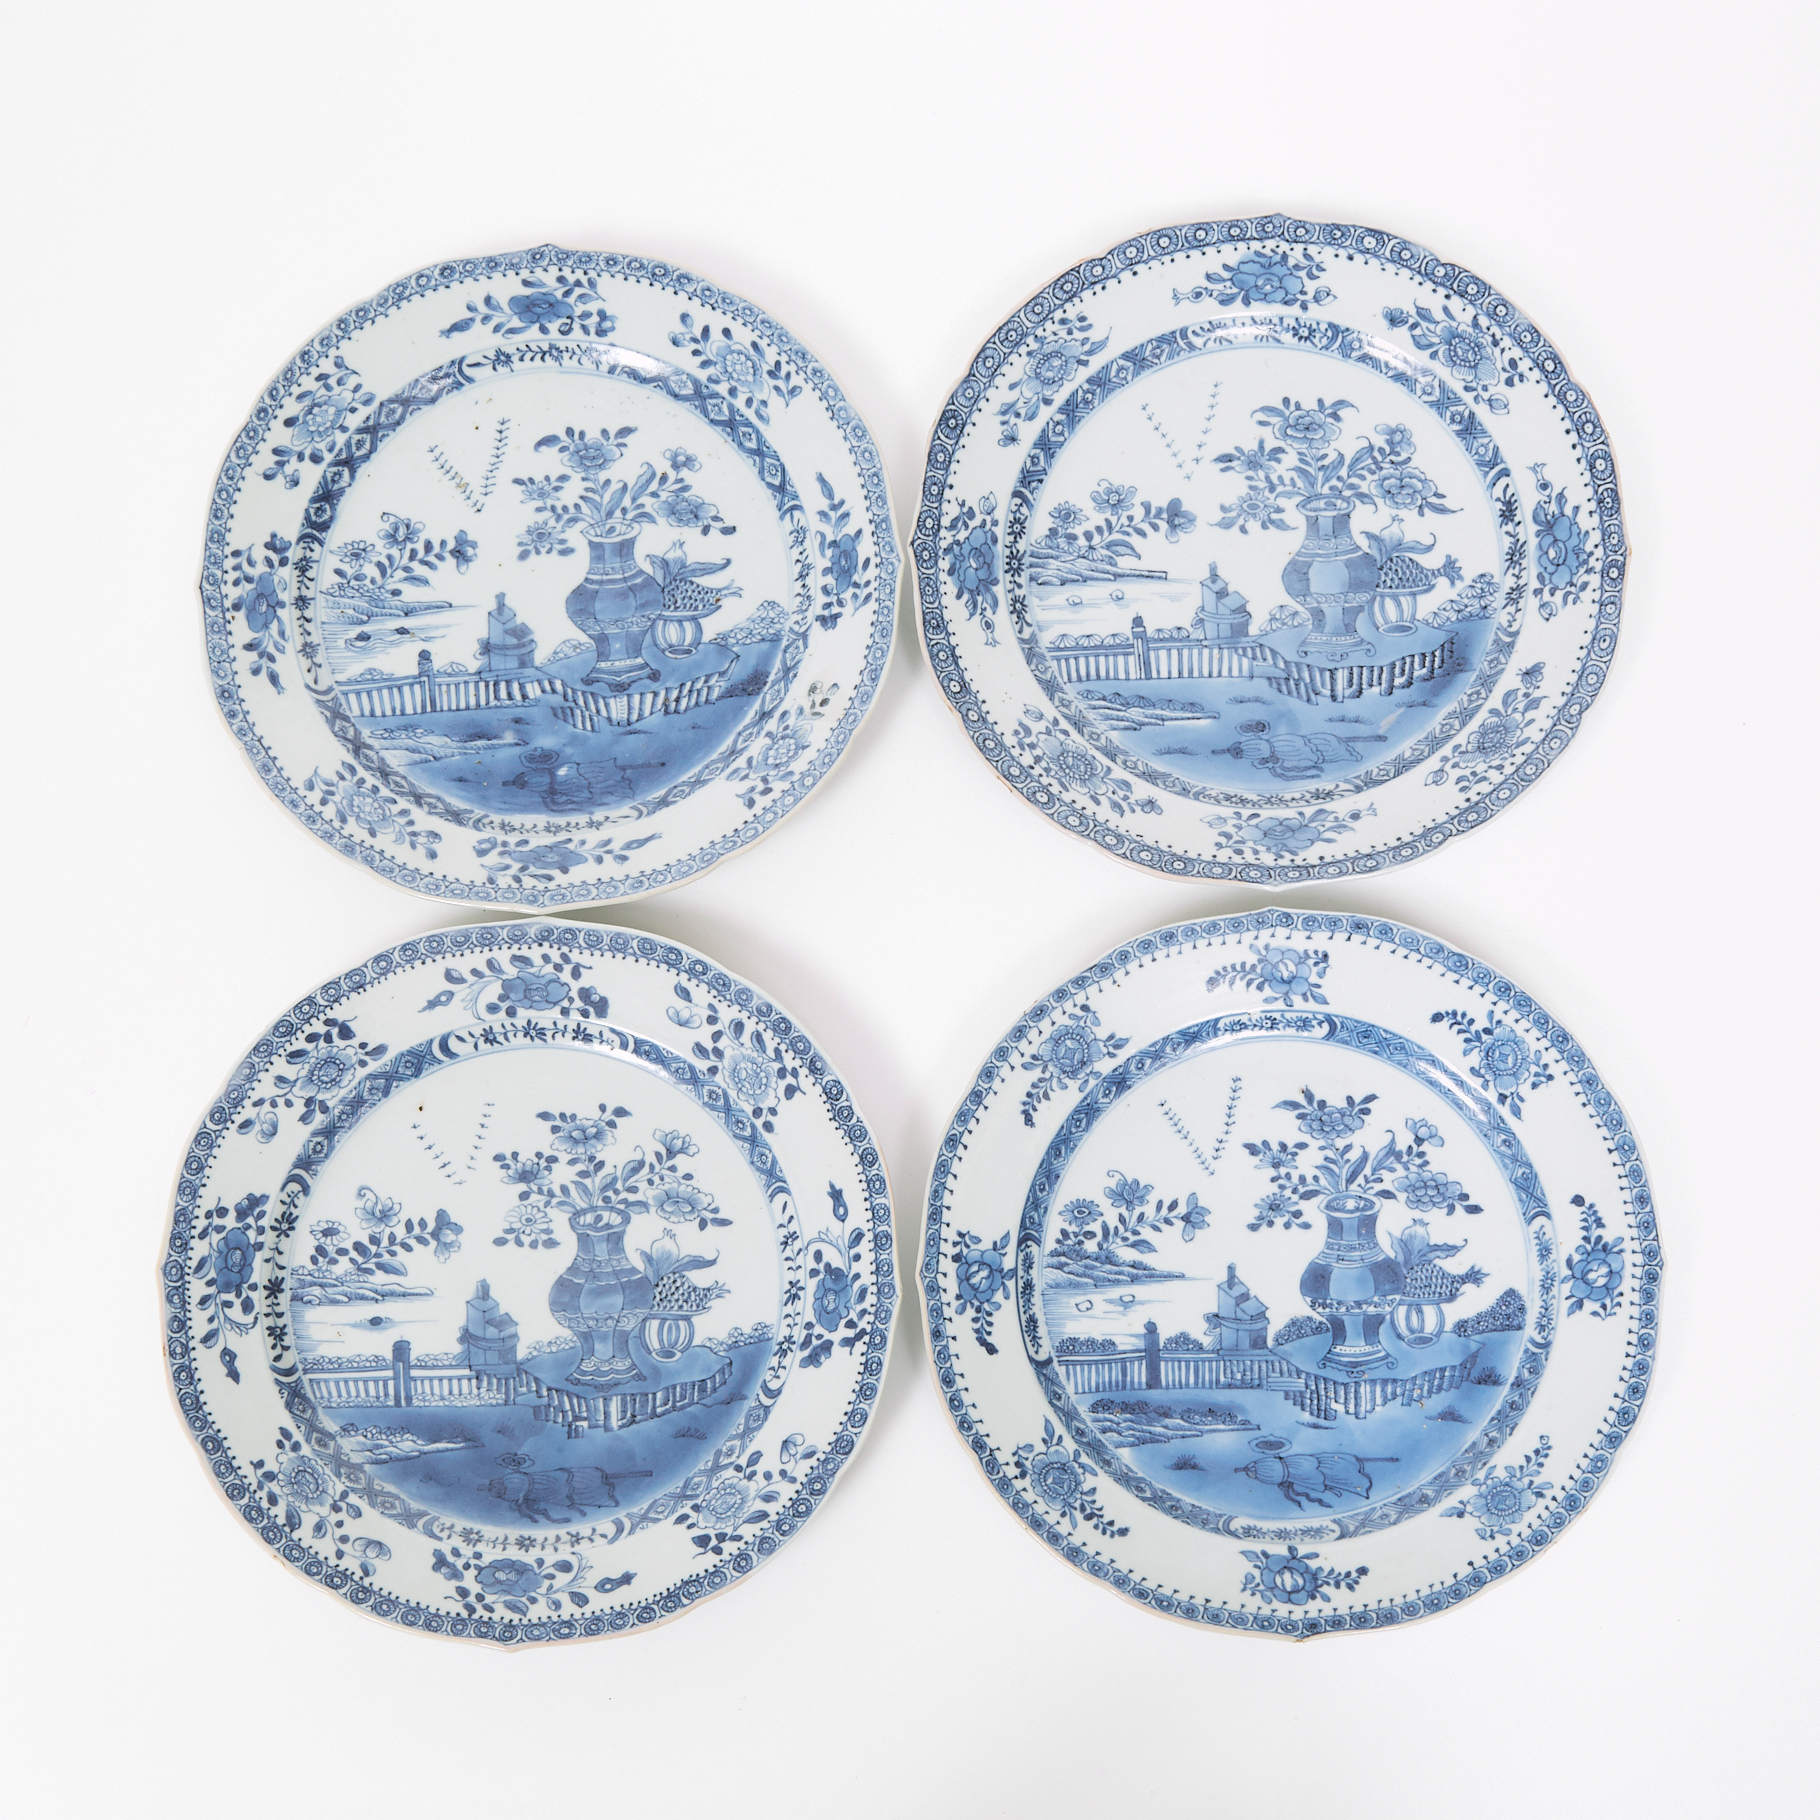 A Set of Four Well-Decorated Blue and White Lobed Plates with Flying Geese for the European Market, 18th Century